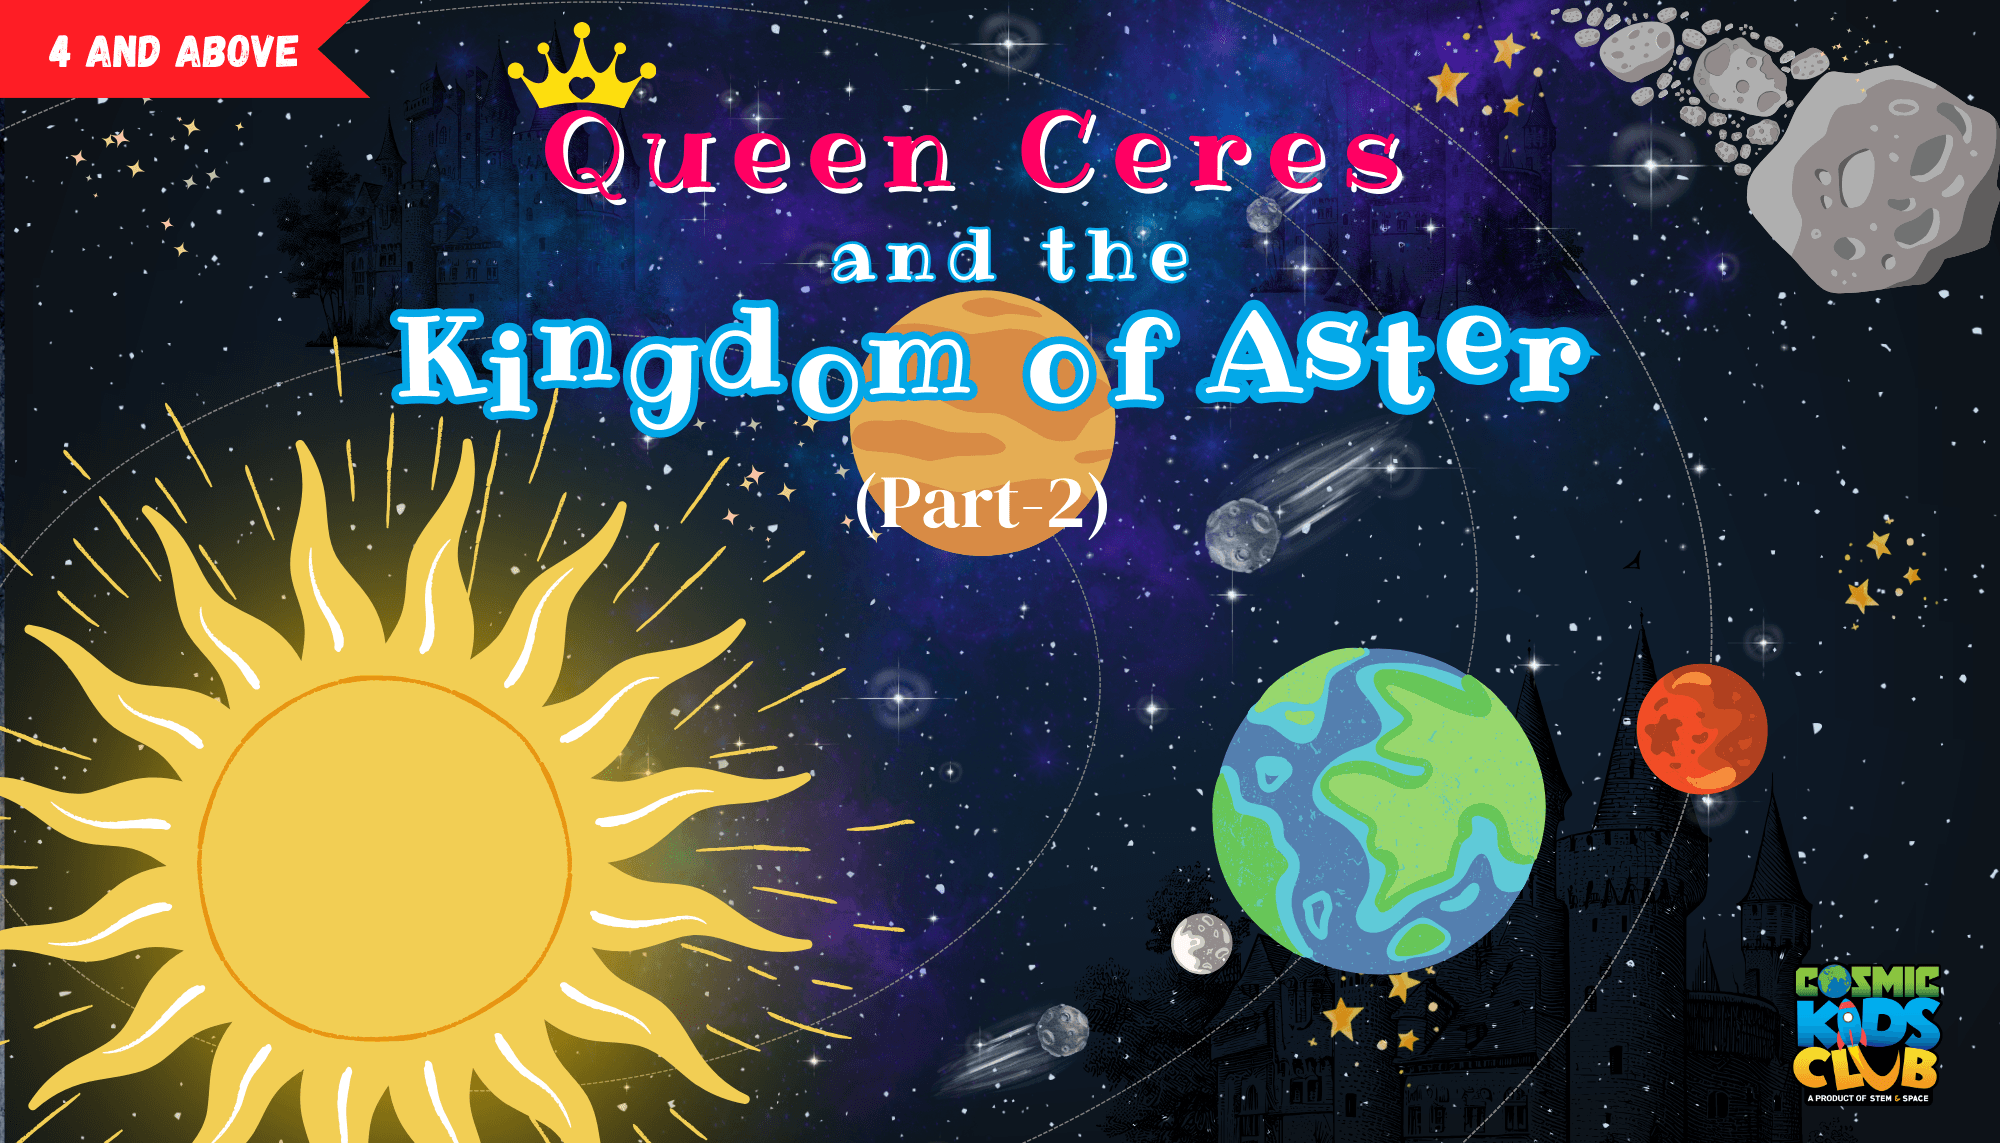 Queen Ceres and Kingdom of Aster (Part 2)